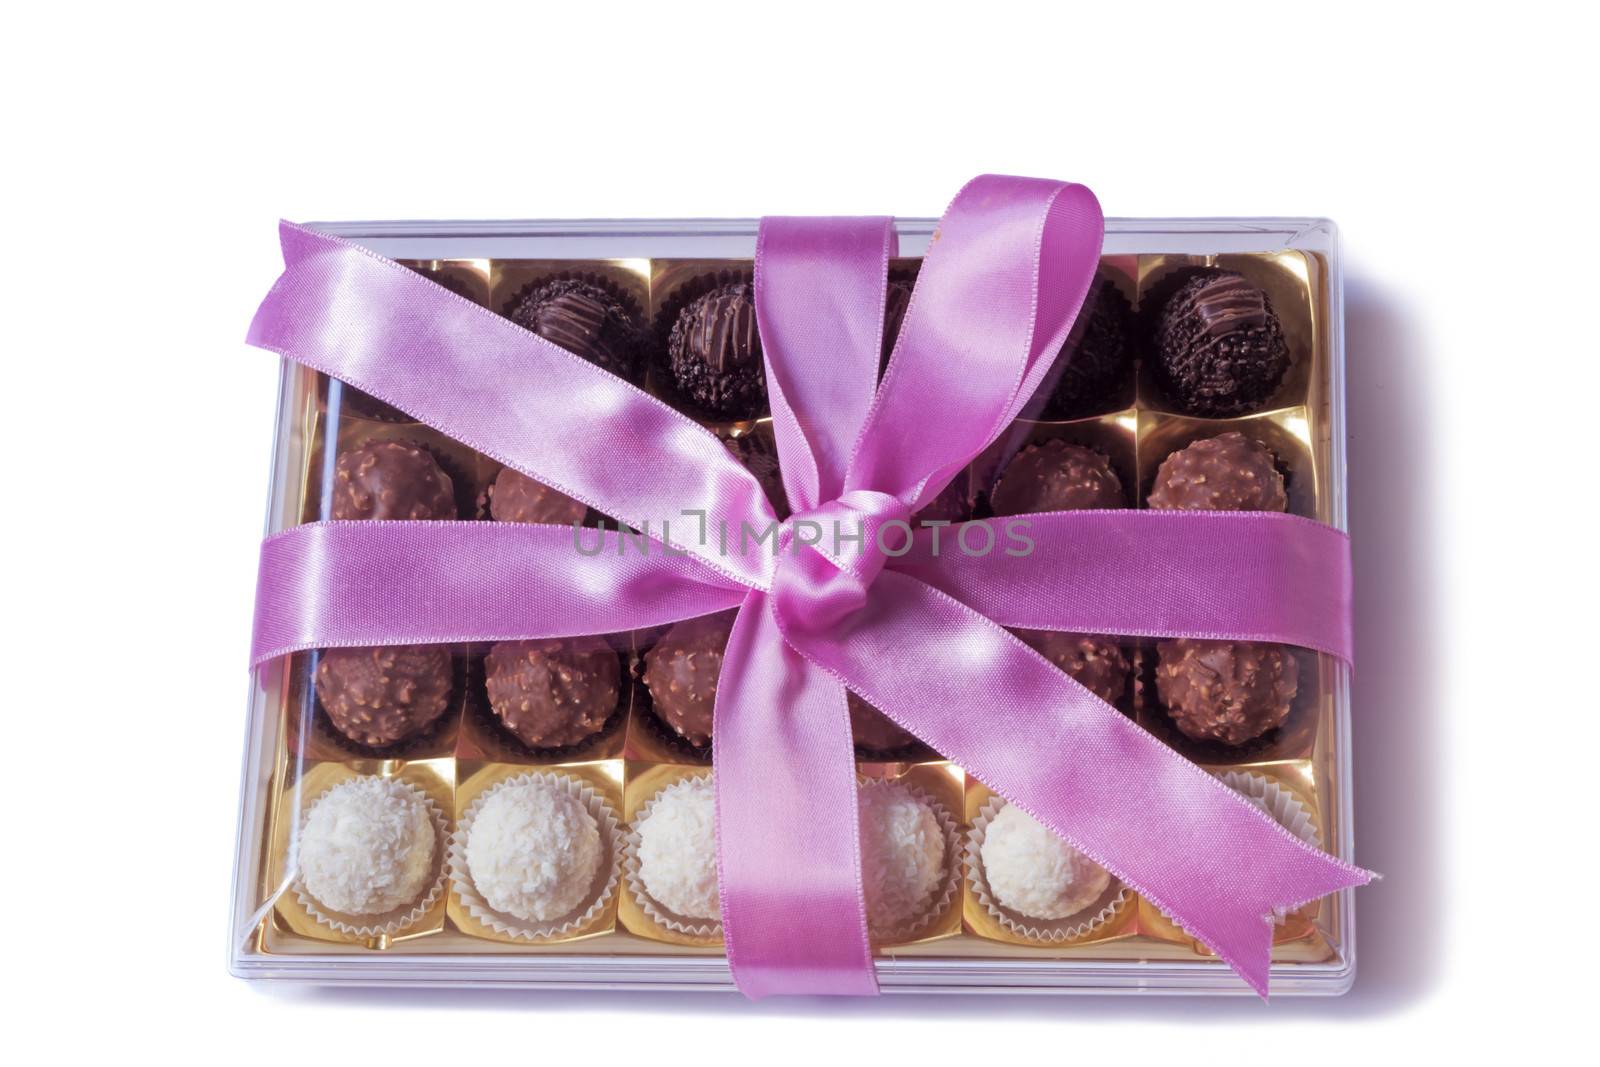 Box of delicious chocolates, nicely decorated and tied with a ribbon gift for any holiday or celebration. Presented on a white background